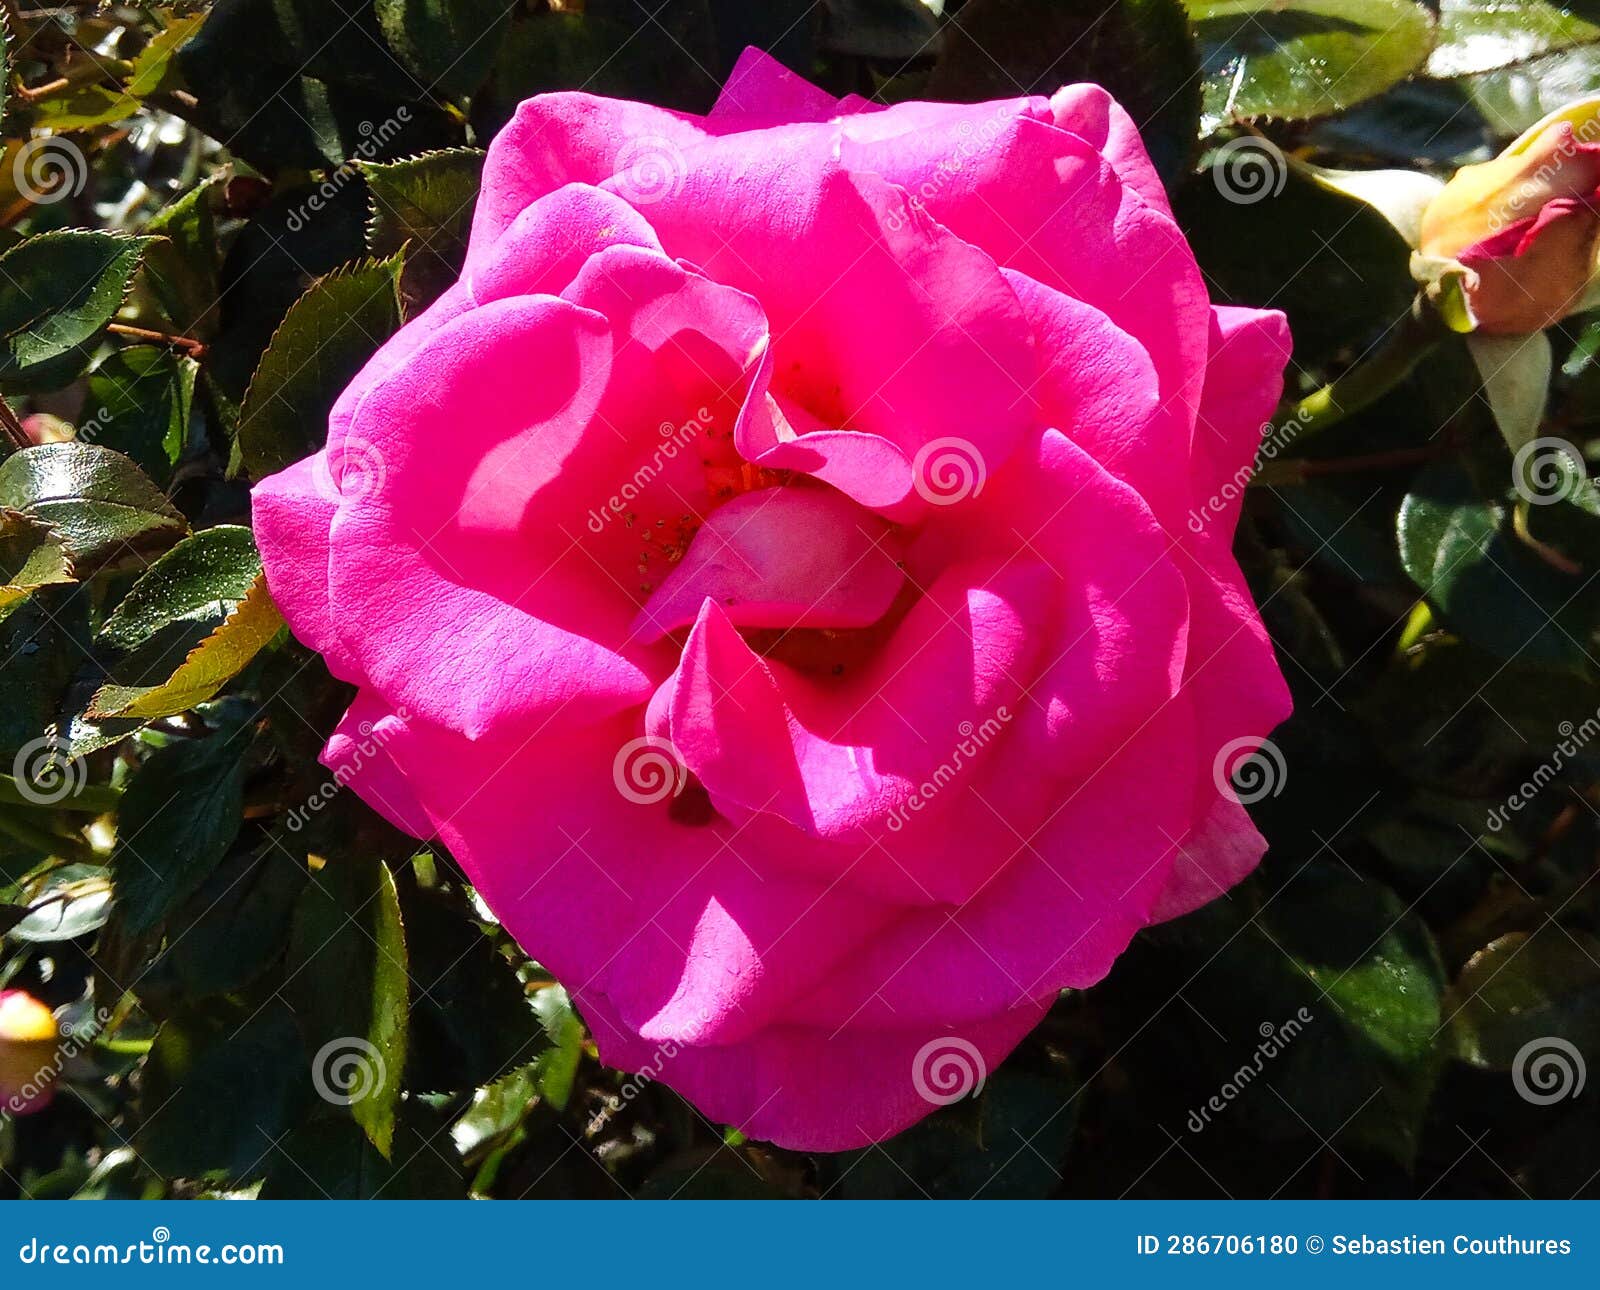 close-up of a magnificent rose (rosa) in pink color